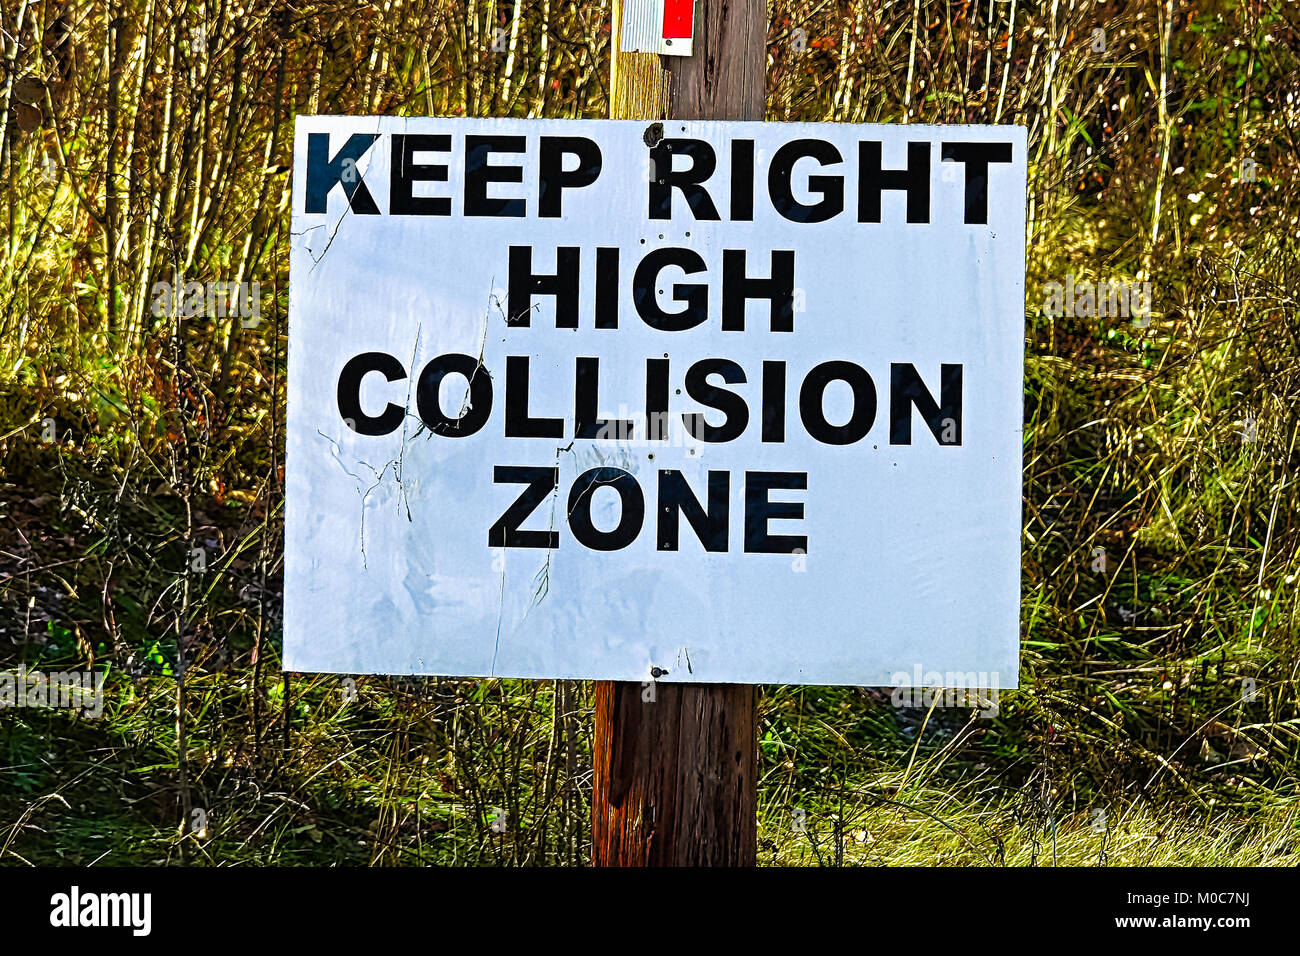 A Keep Right High Collision Zone sign Stock Photo